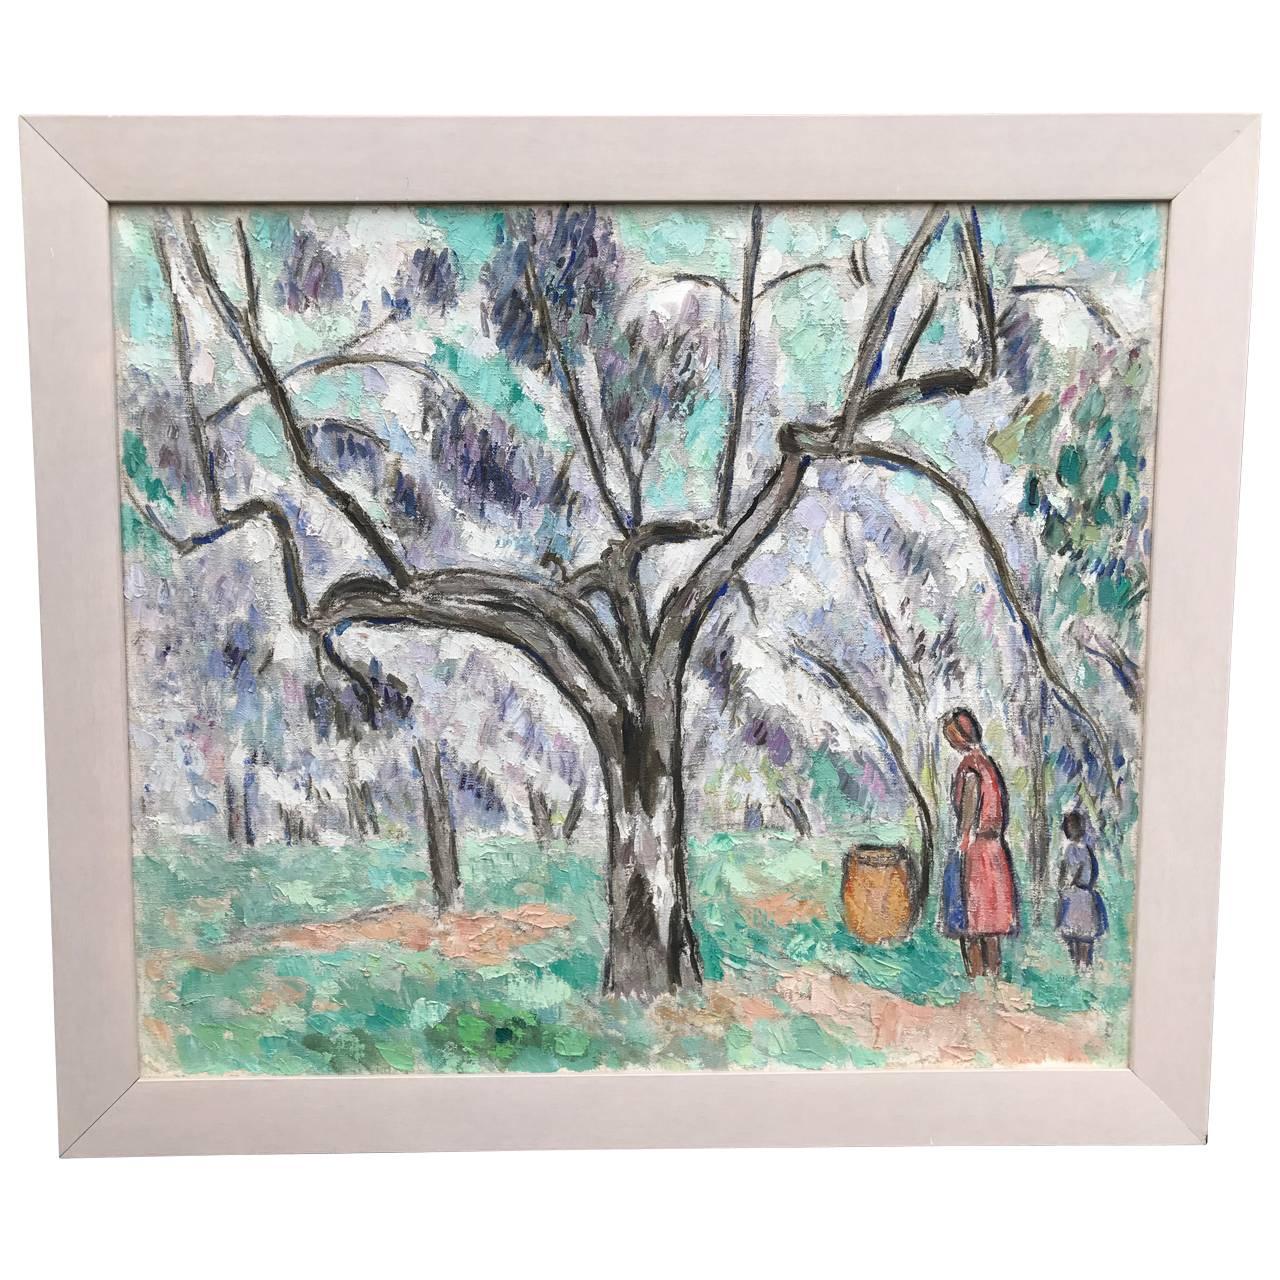 Pair of impressionist oil paintings depicting workers gathering fruit in an orchard.